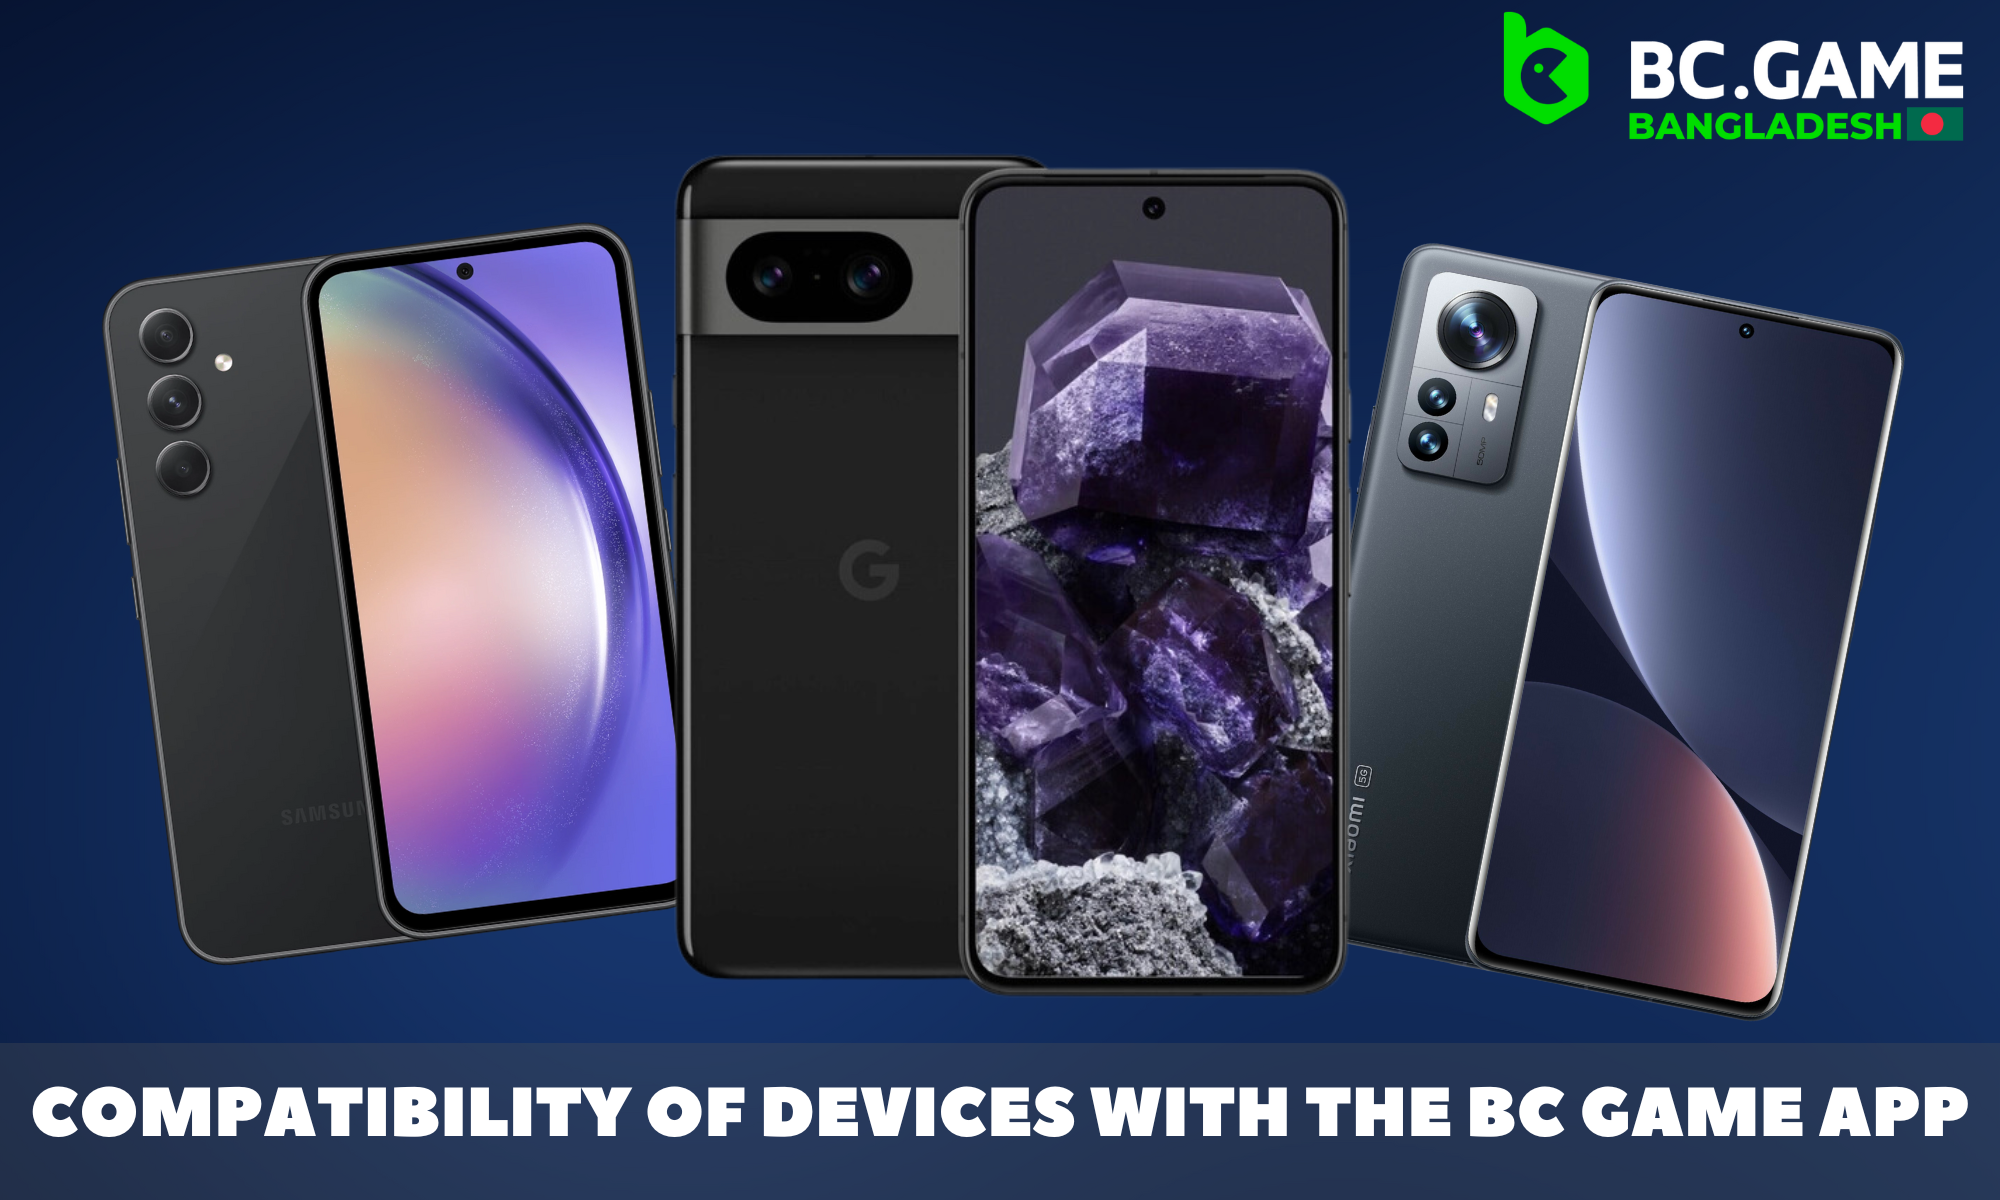 Which devices will be compatible with the BC Game application